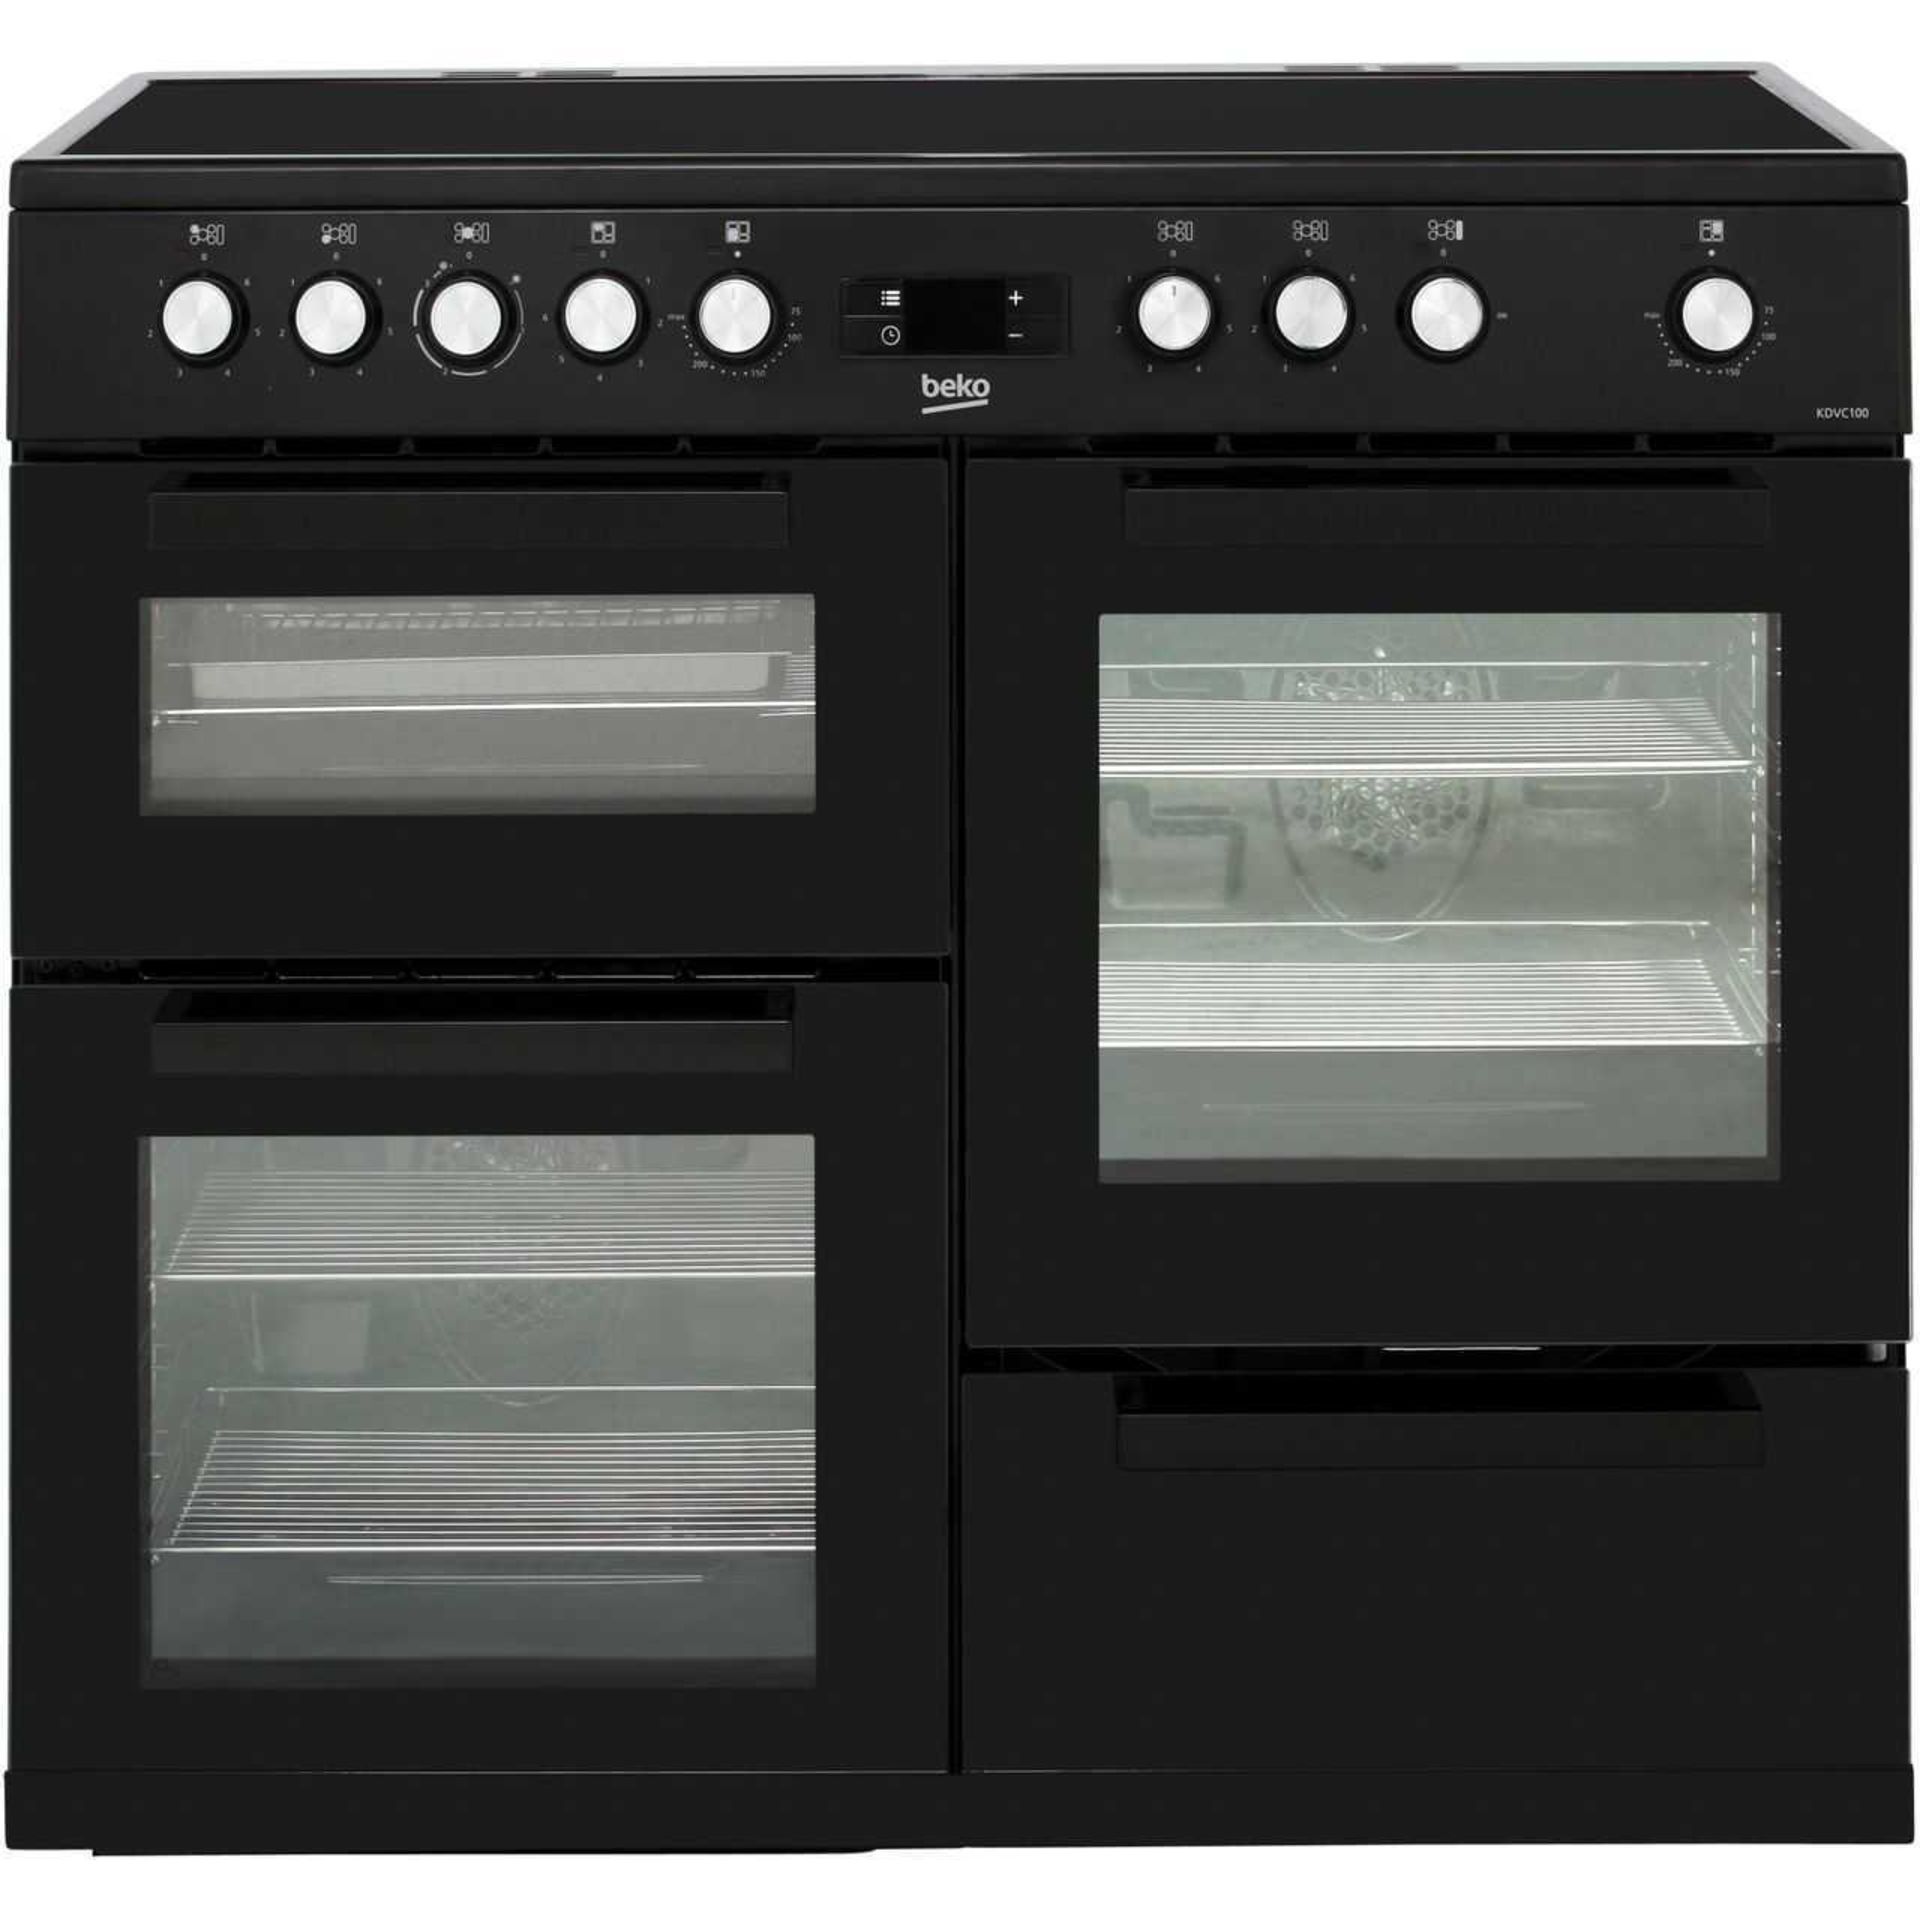 (Sp) RRP £450 Lot To Contain 1 Beko Kdvc100K 100Cm Electric Range Cooker With Ceramic Hob - Silver - Image 2 of 4